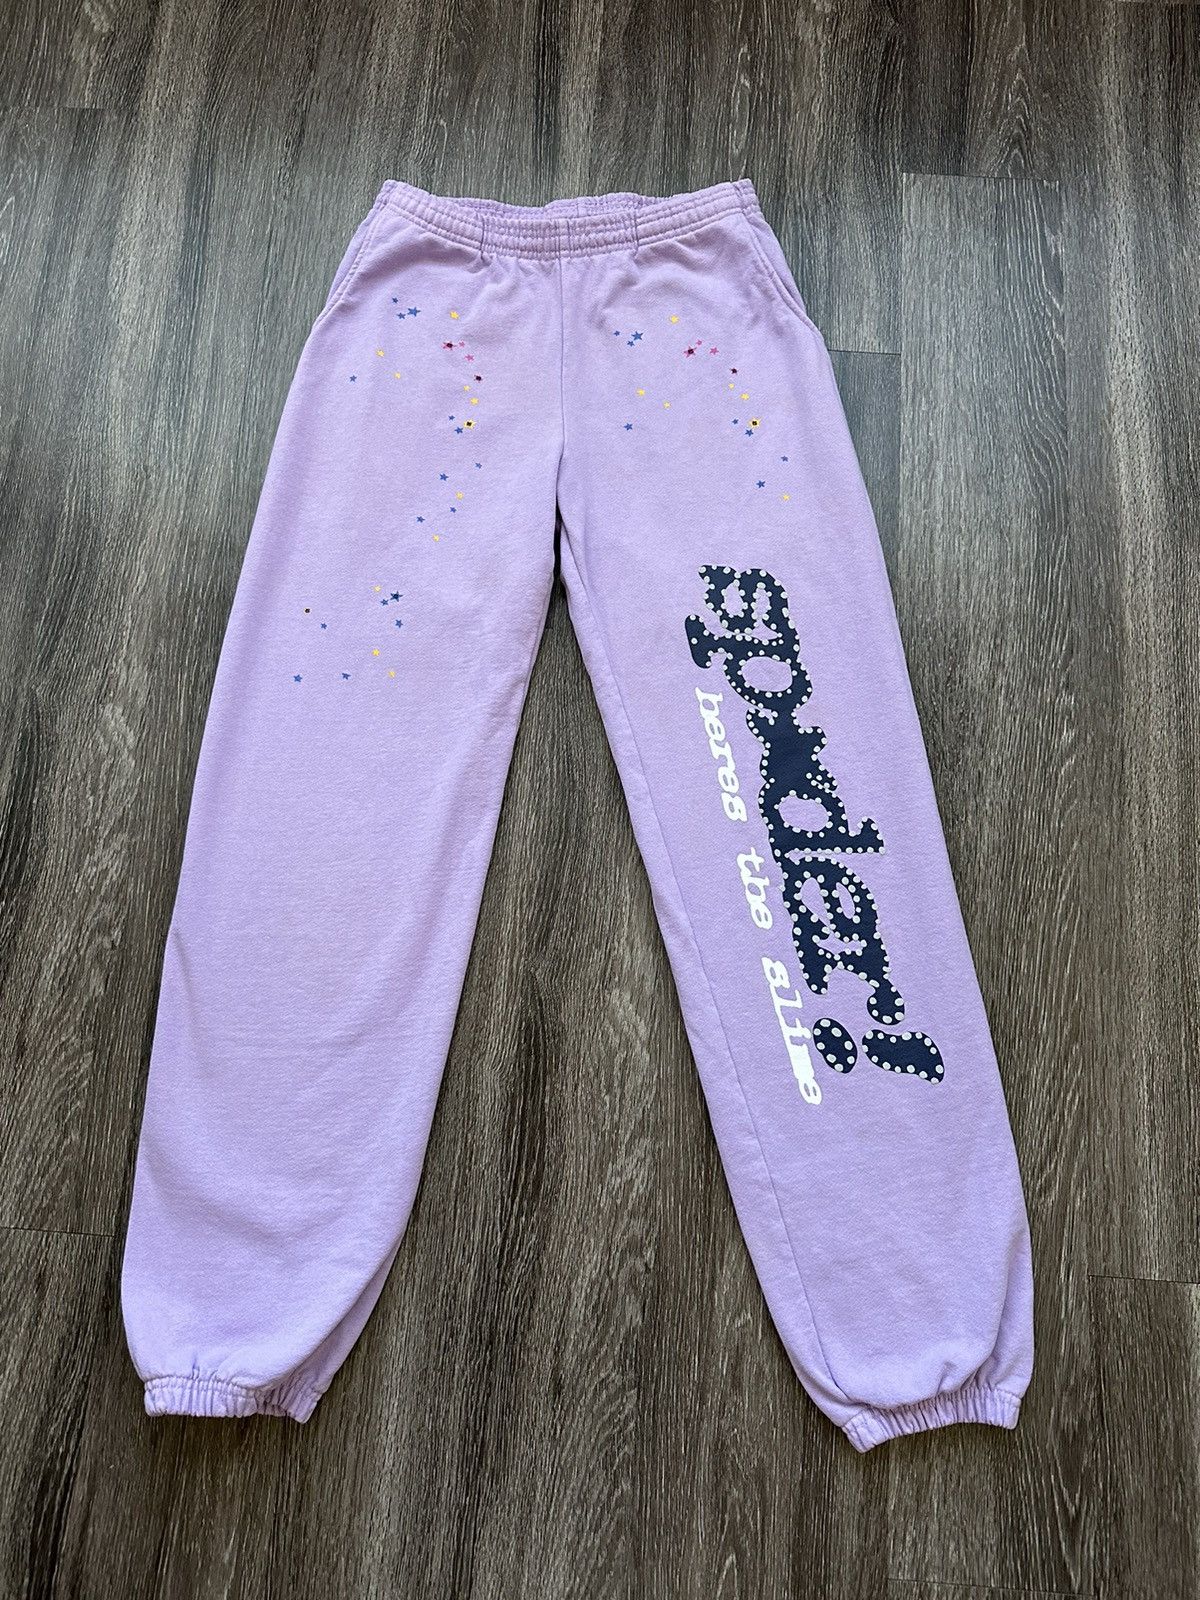 Pre-owned Spider Worldwide X Young Thug Sp5der Acai Sweatpants Purple Small Young Thug